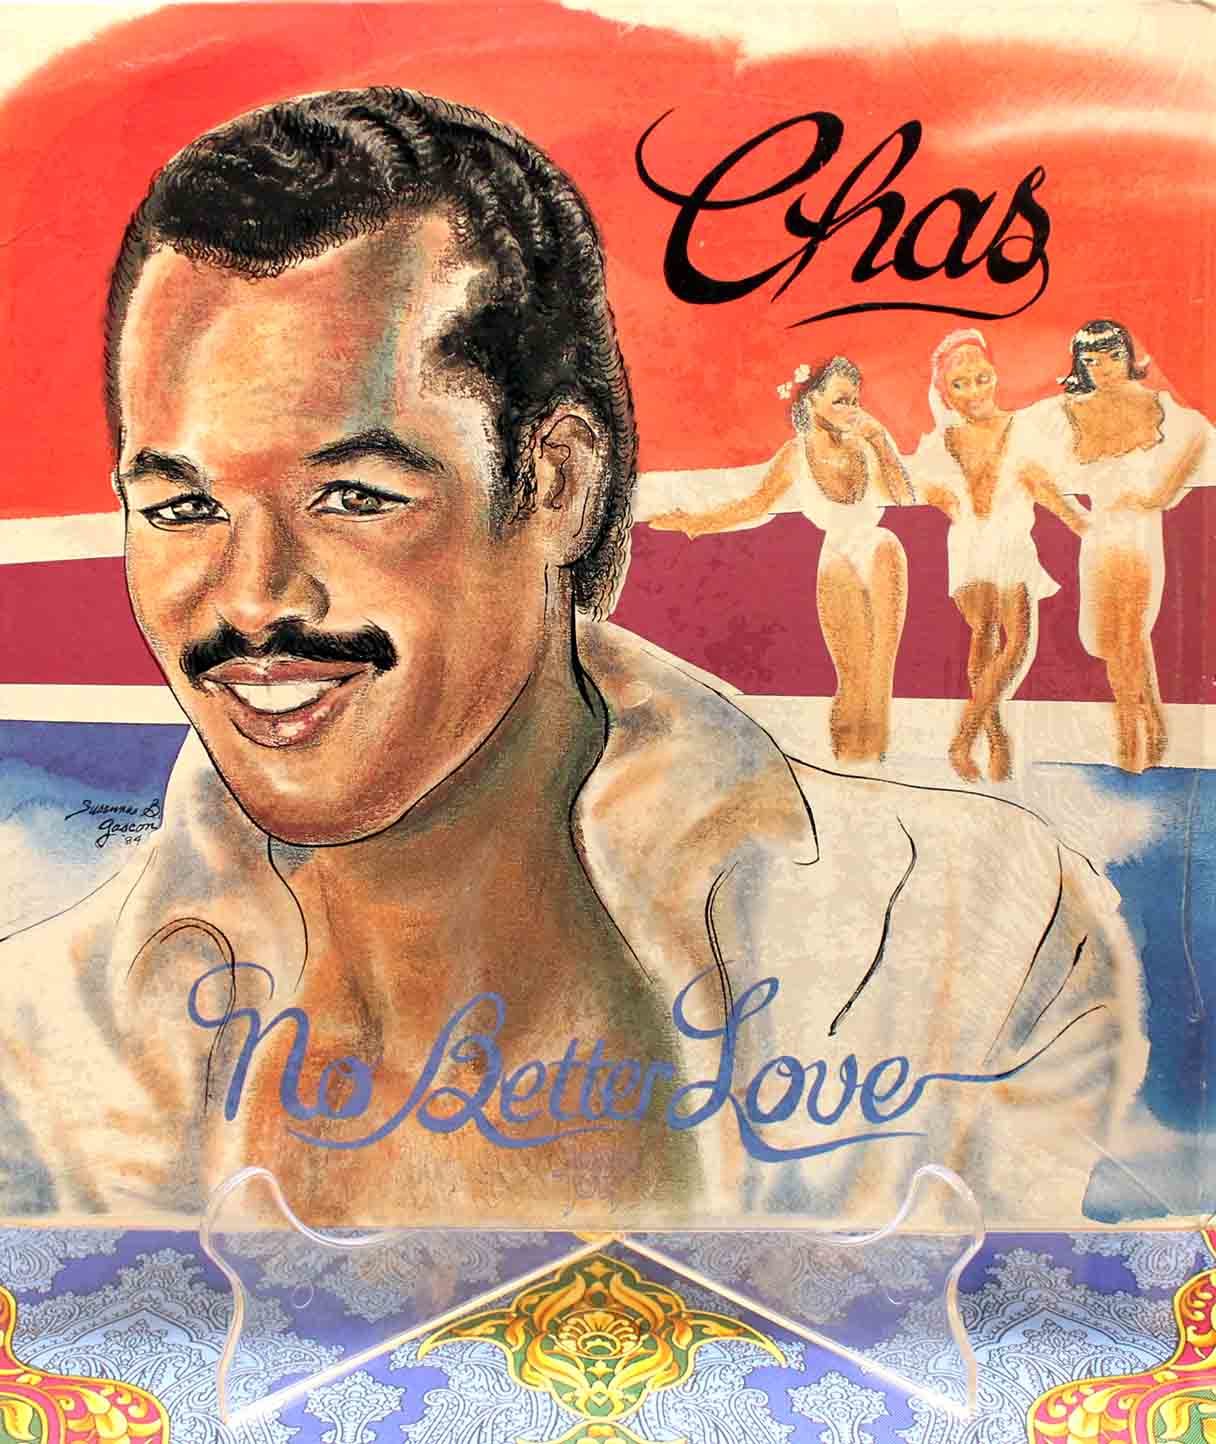 Chas (1985) – No Better Love 01